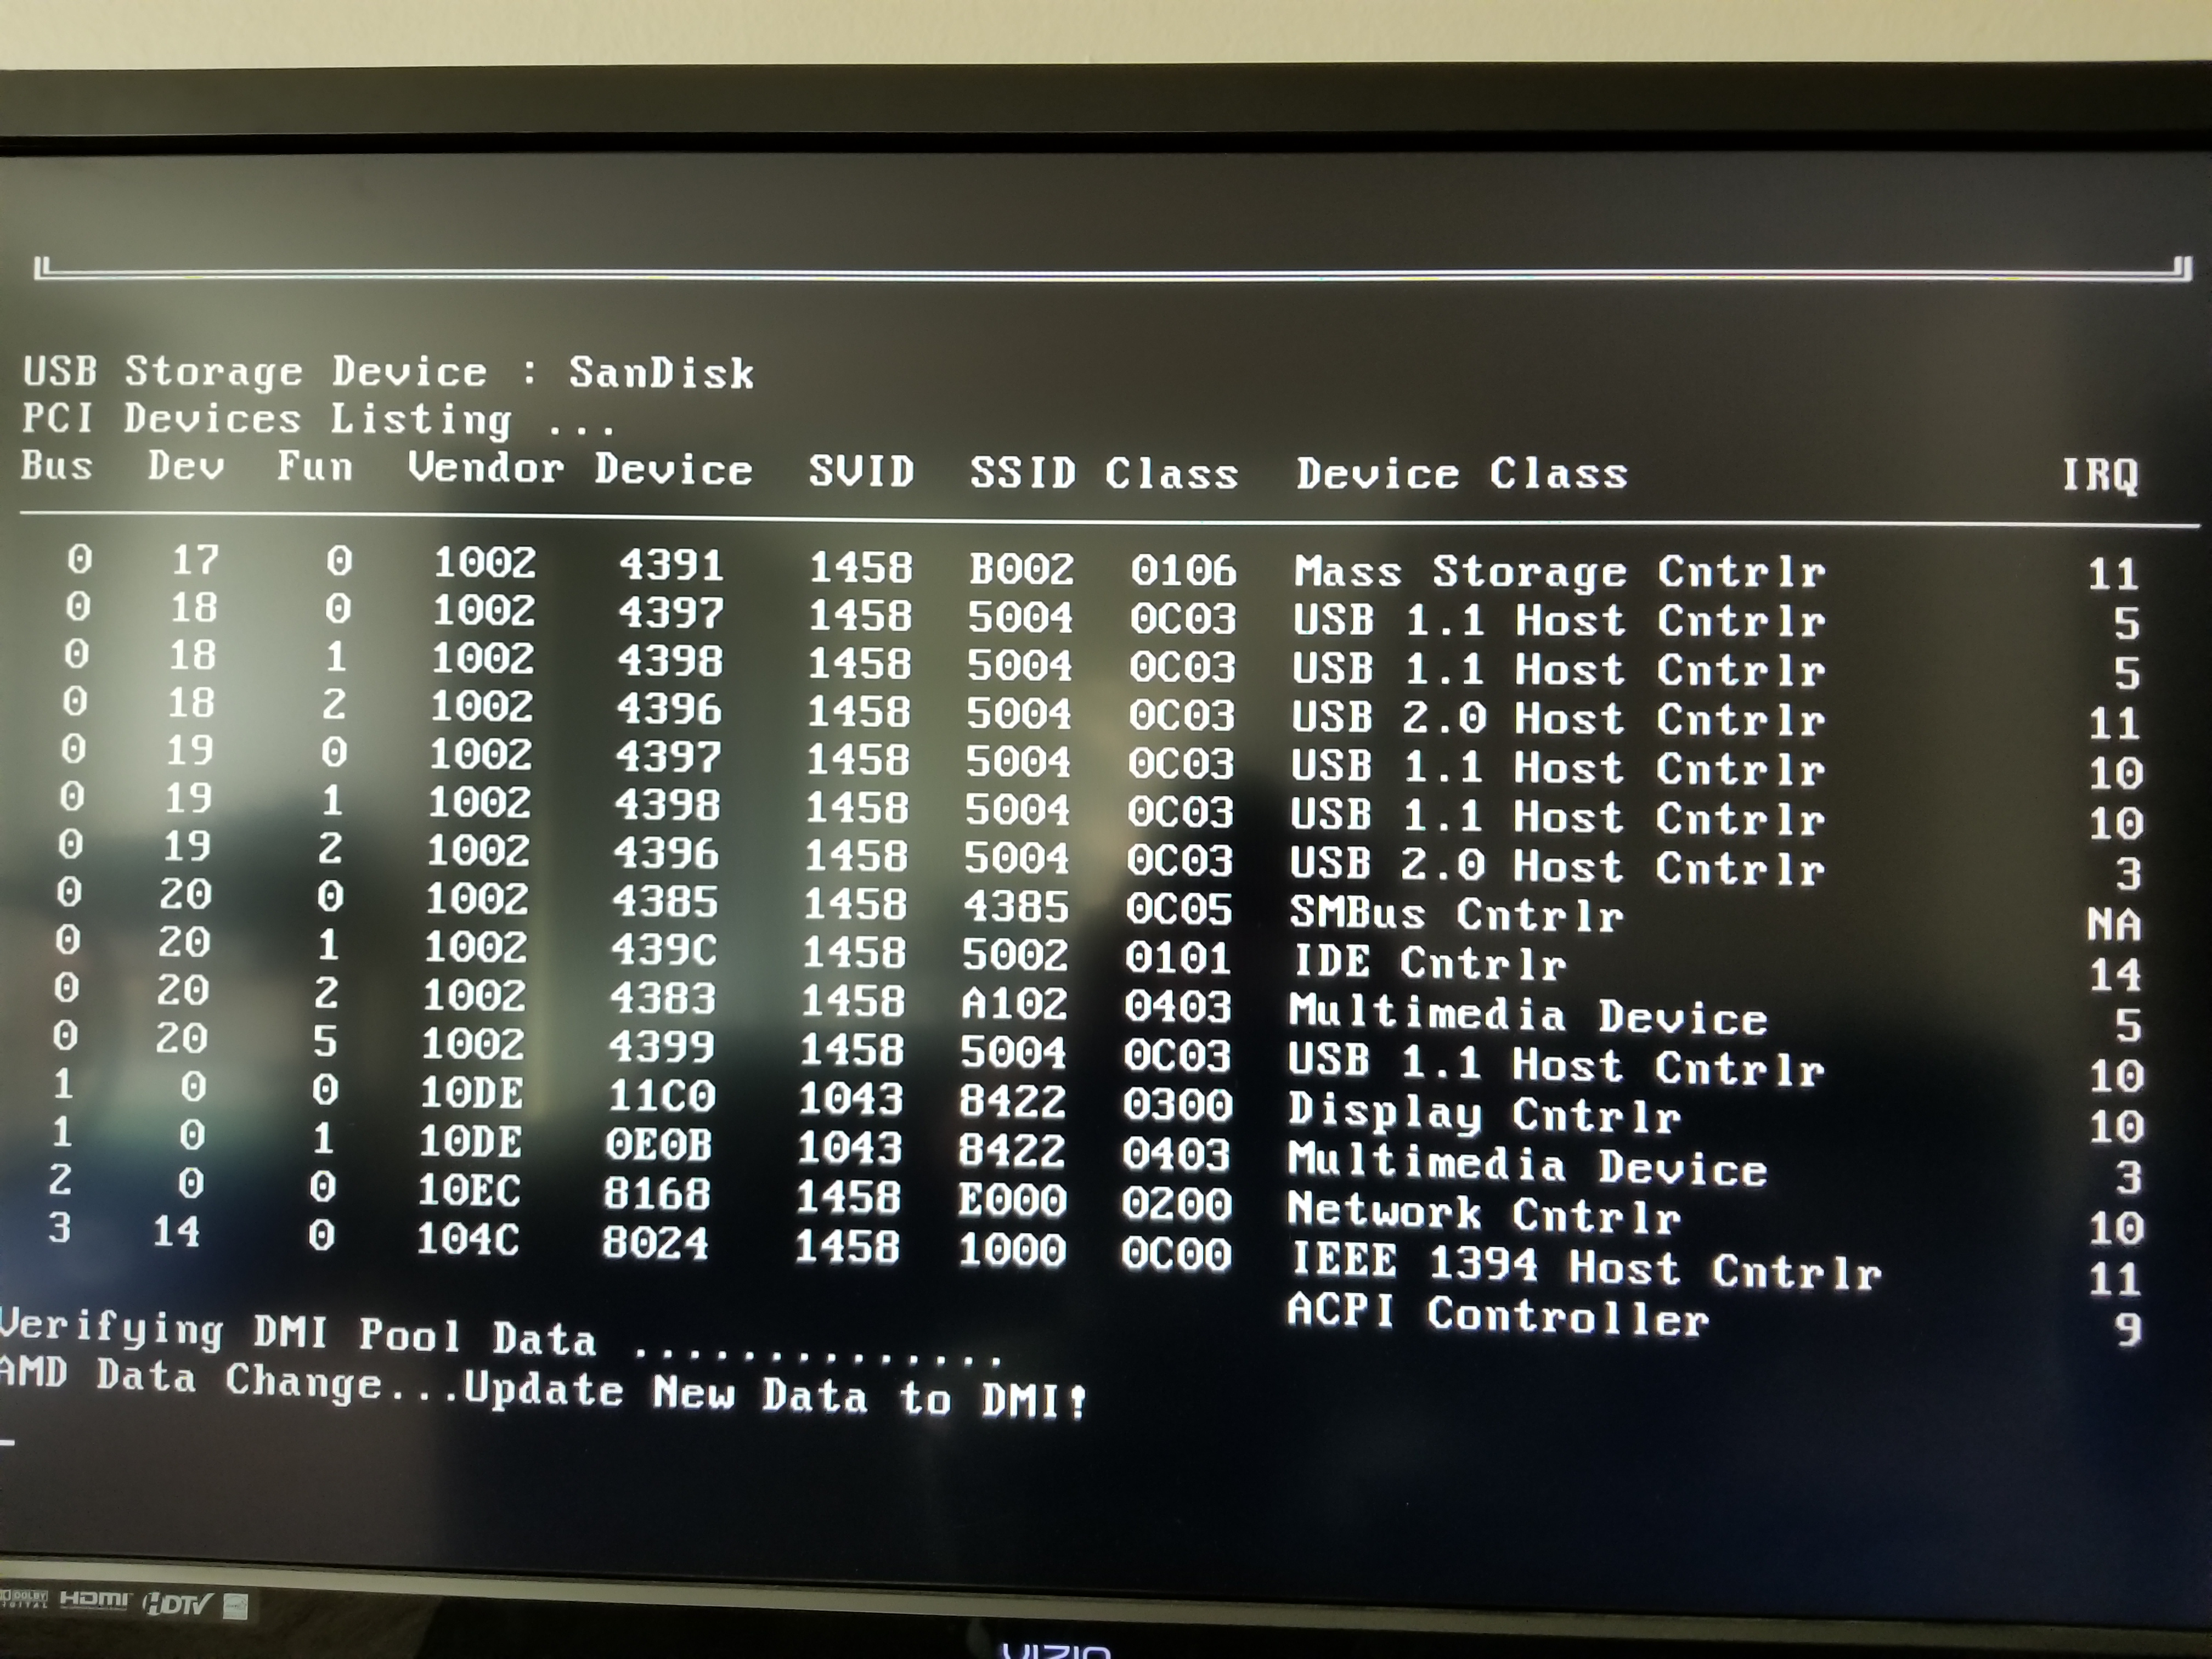 Amd New Data To Dmi Troubleshooting Linus Tech Tips